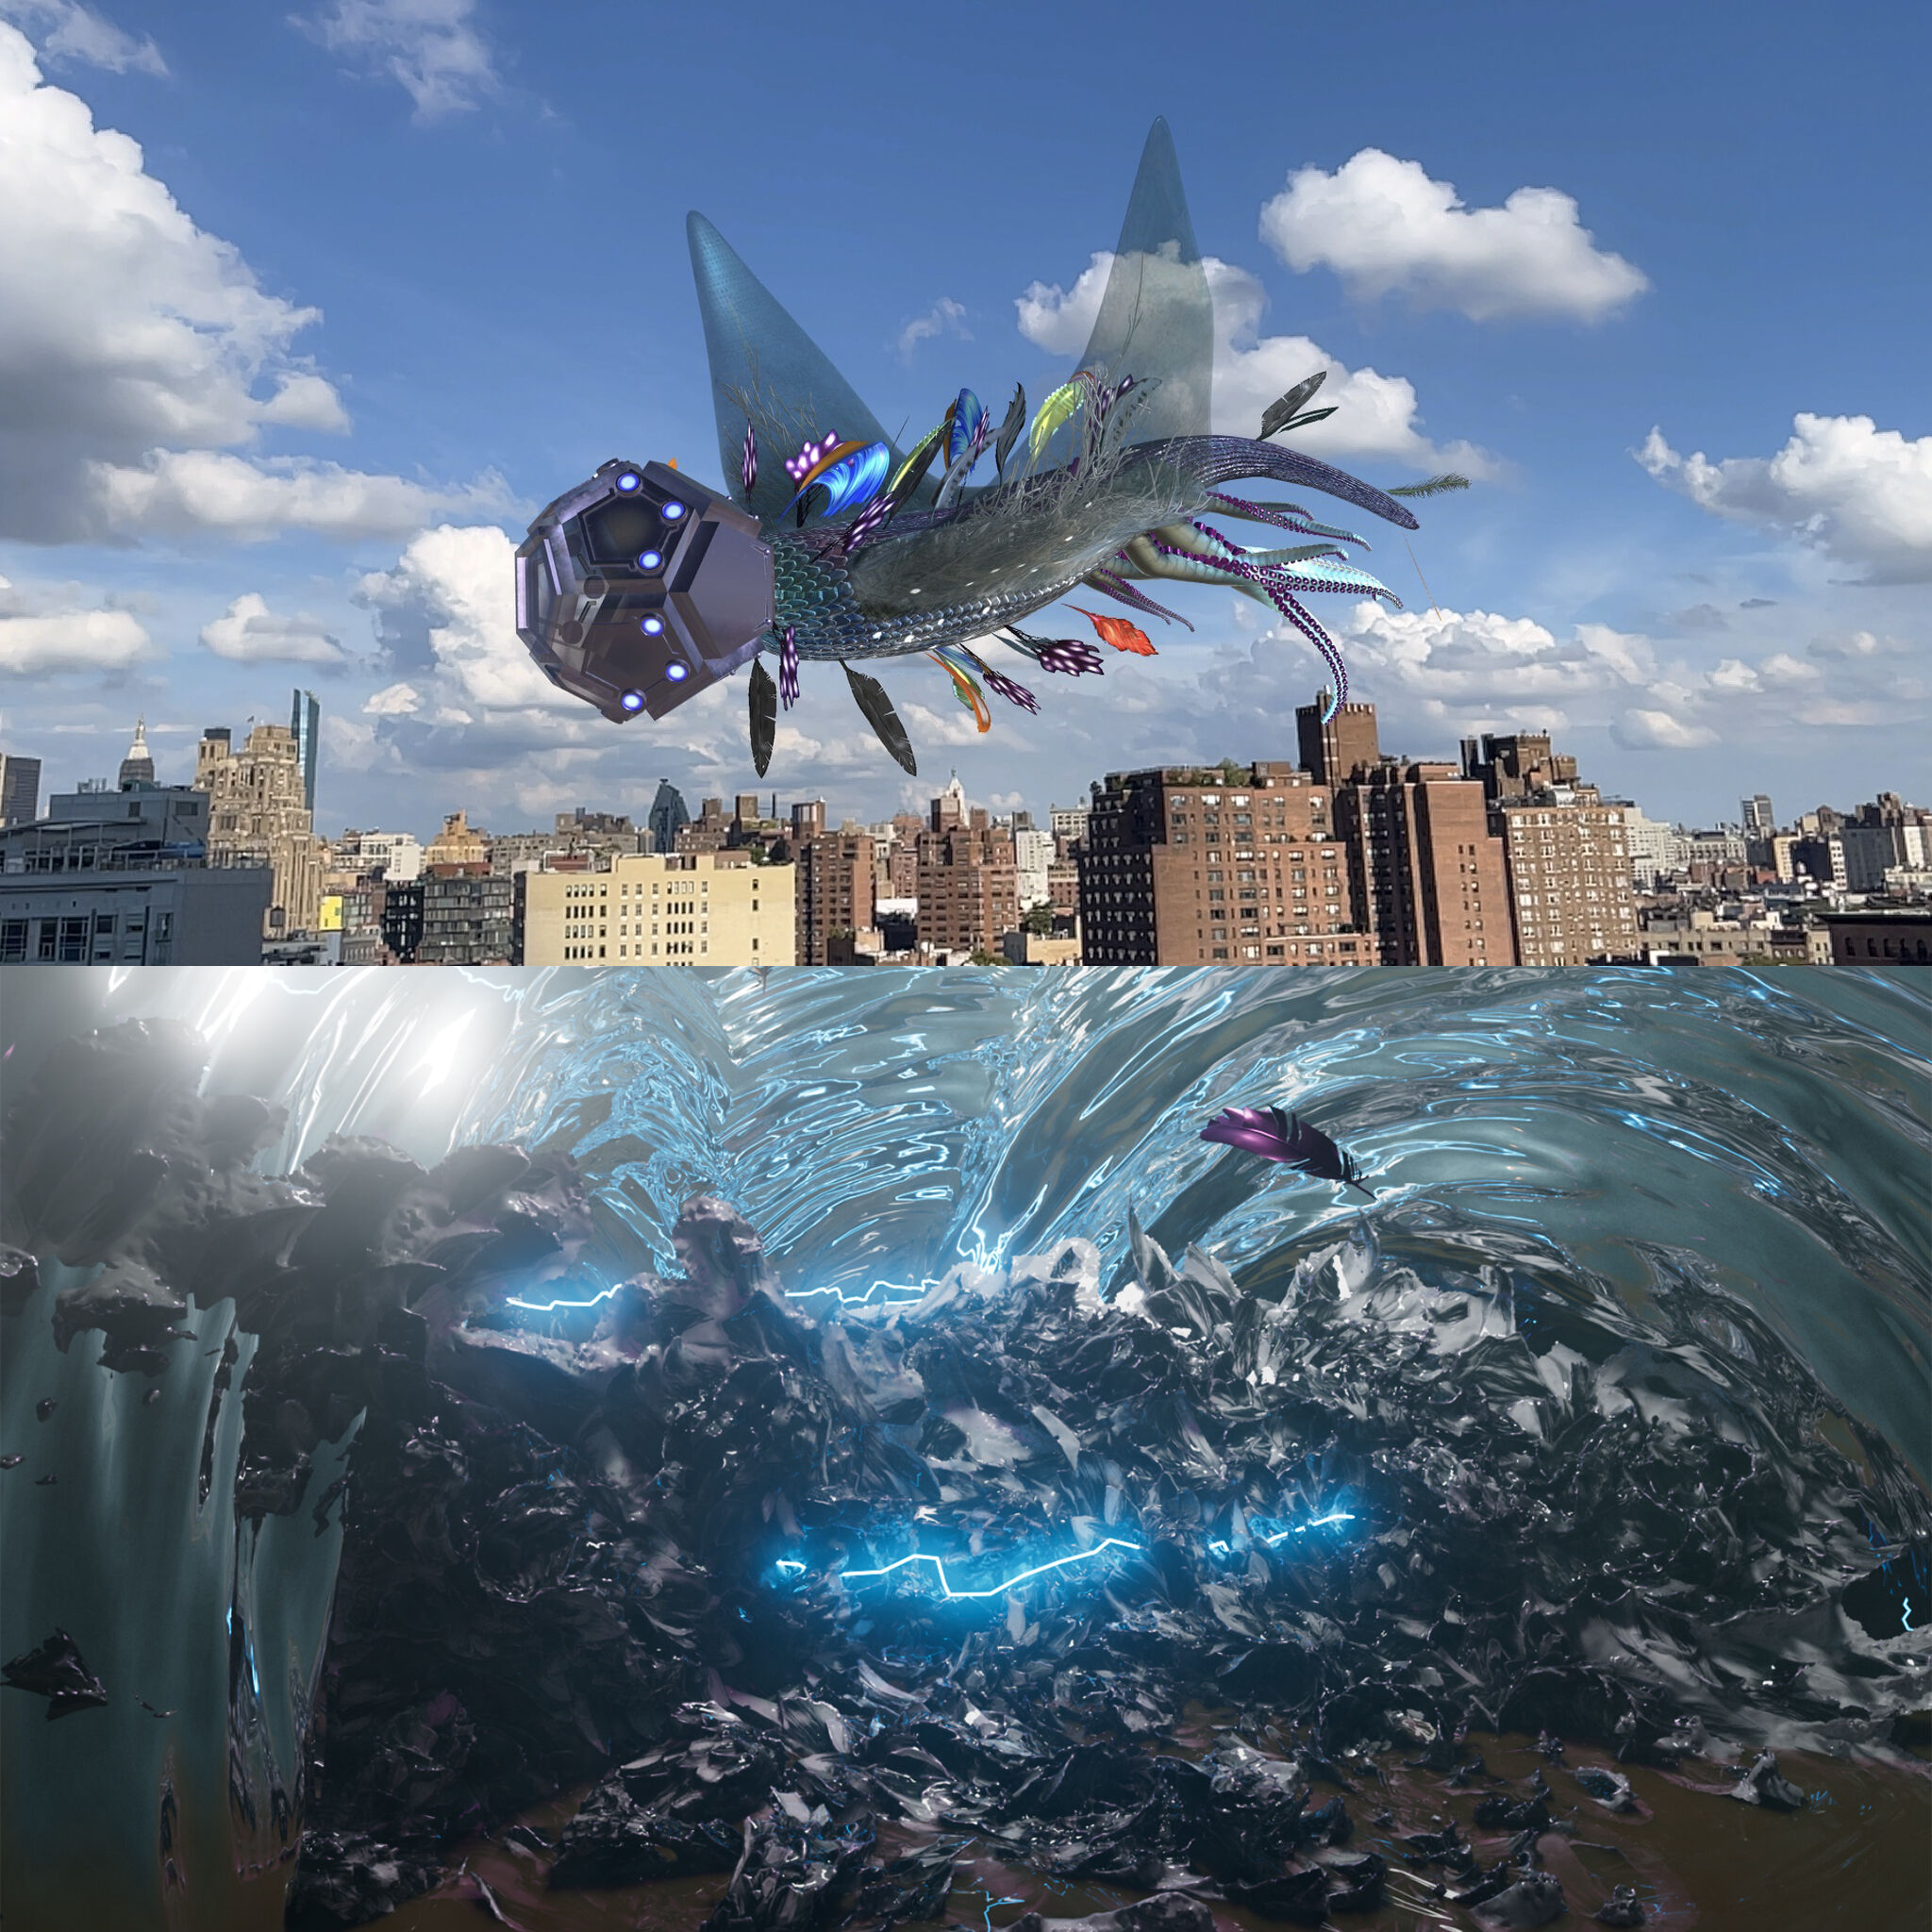 Diptych of two images. On top is a alien-looking creature flying in the sky above New York, covered in scales and feathers with a polygonal head. Beneath is the creature's environment, a mass of shapes and darker tones of black and blue, with electricity in the center and water and light above, with one purple feather to the side.